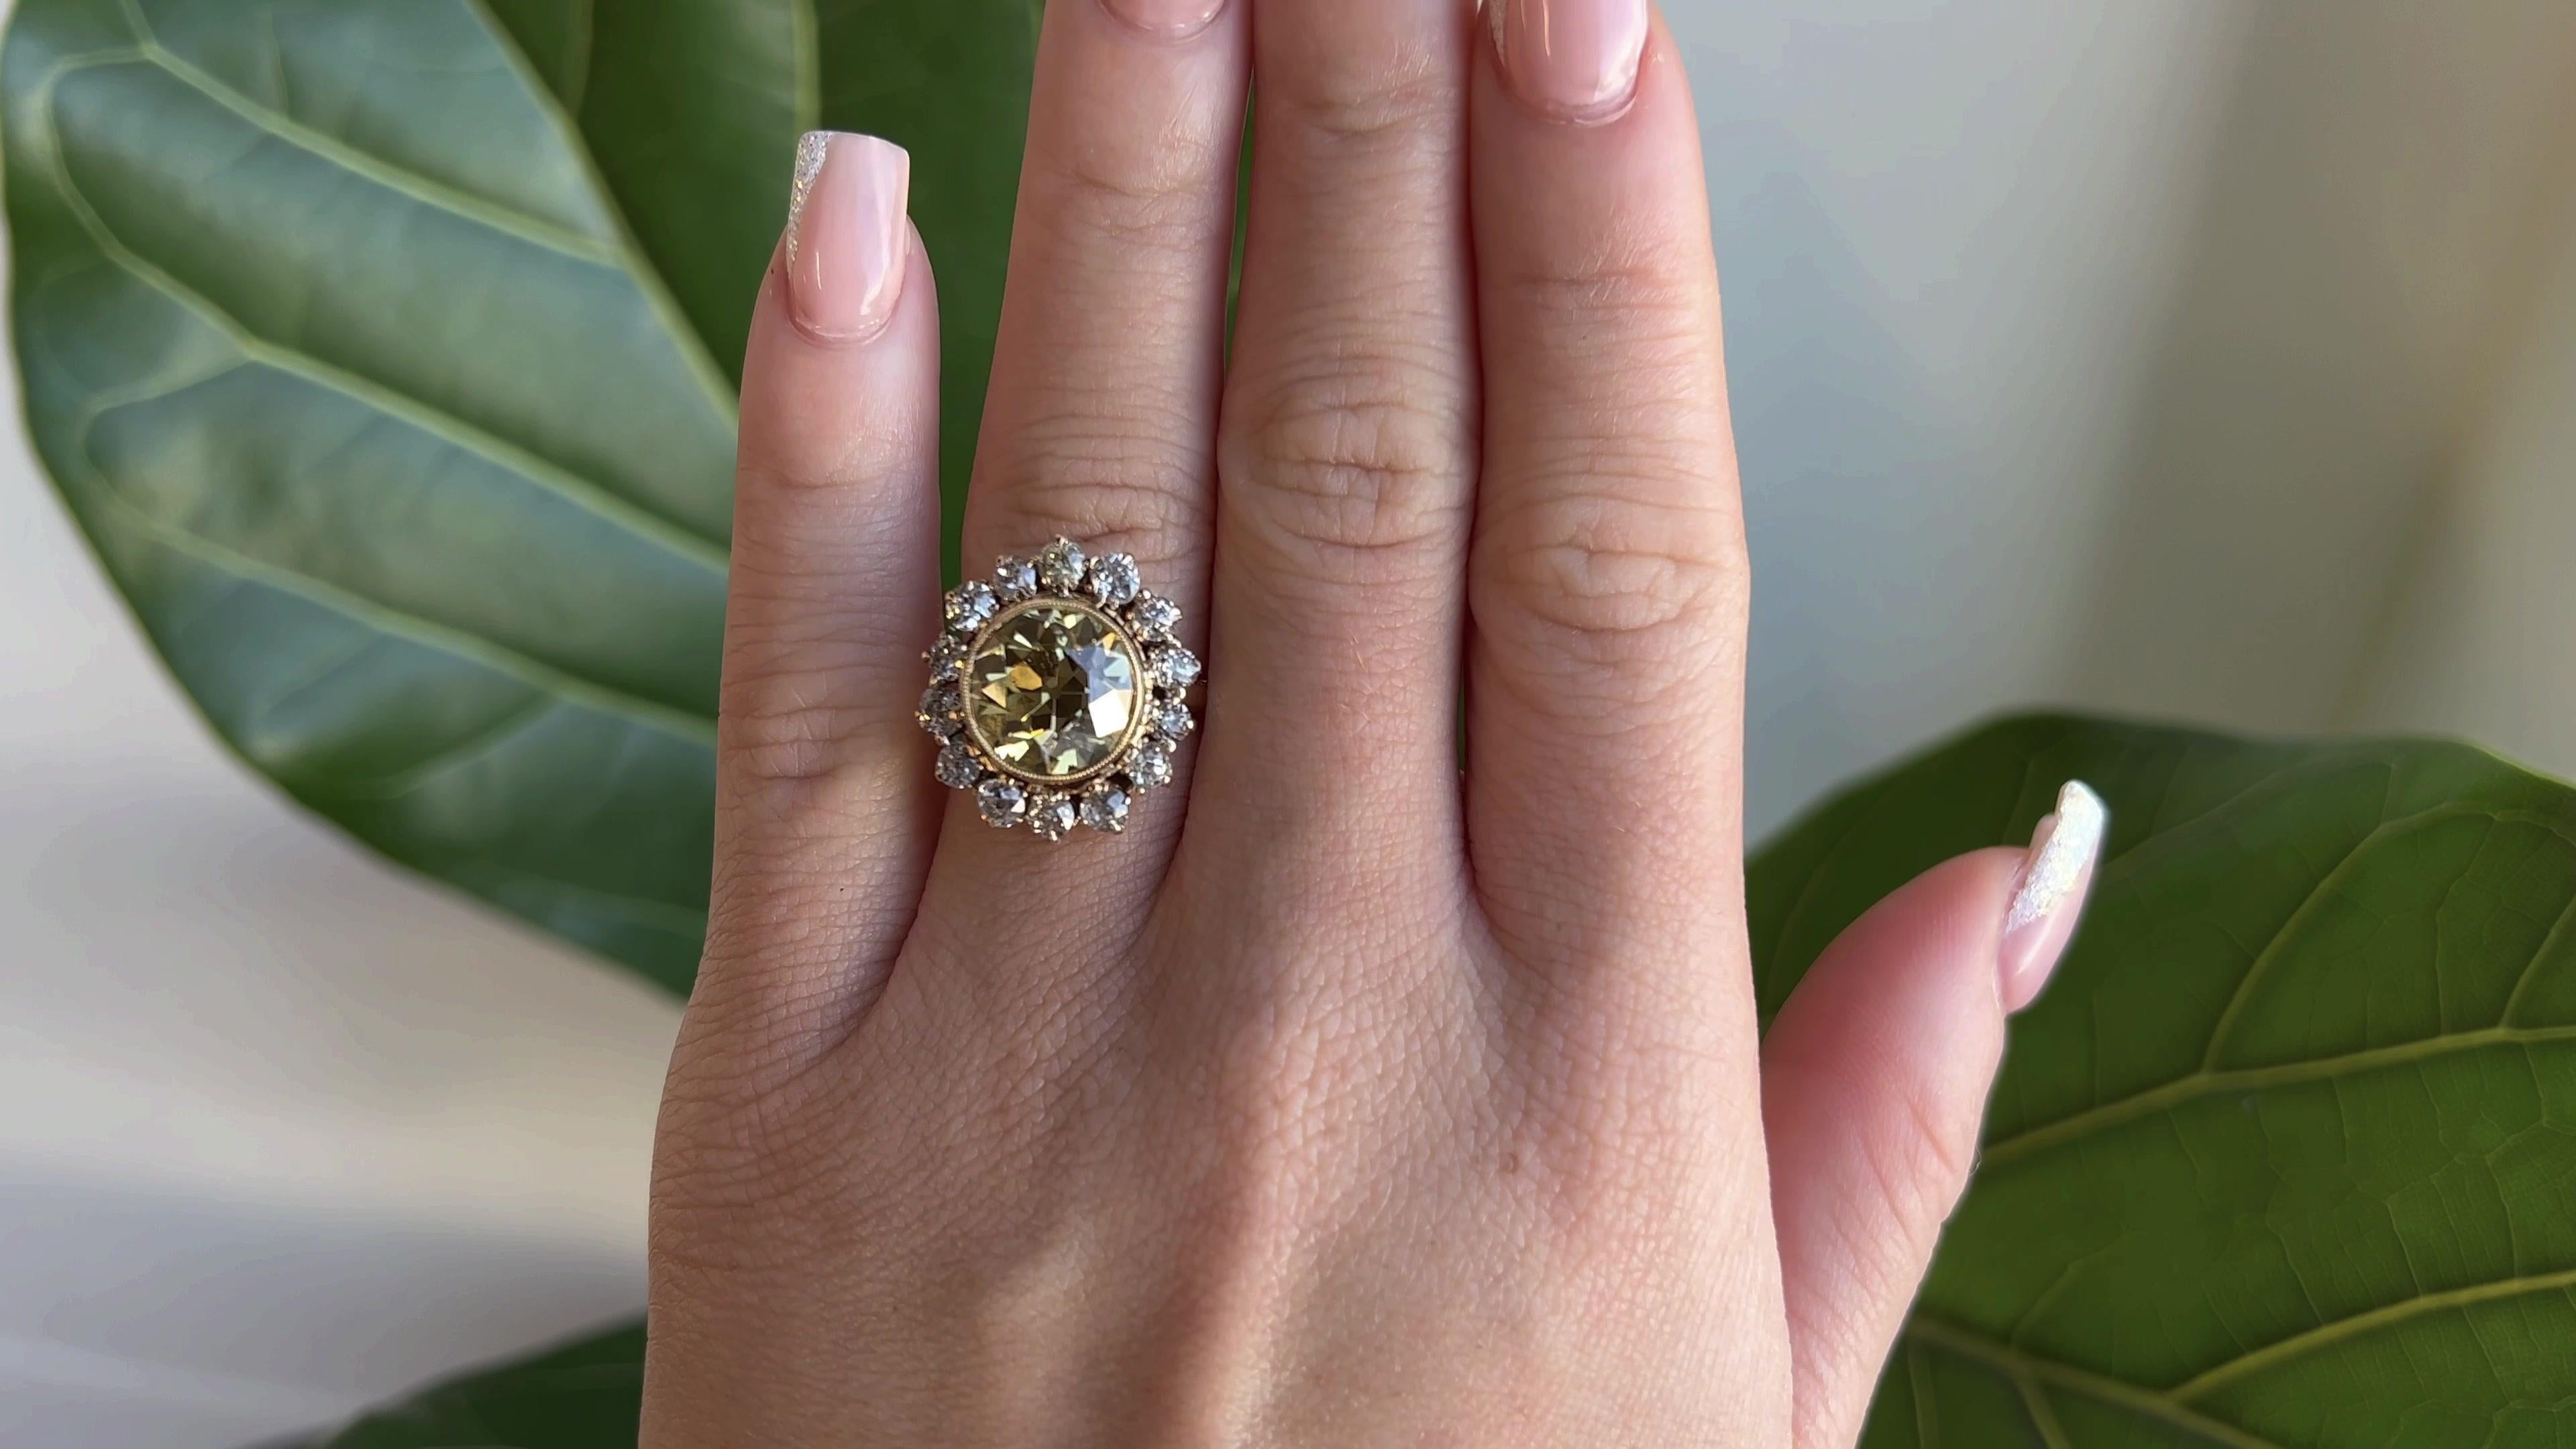 One Antique GIA 5.79 Carat Old European Fancy Brown-Yellow Diamond Gold Cluster Ring. Featuring one GIA certified old European cut diamond of 5.79 carats, accompanied with certificate #5222240027 stating the diamond is fancy brown-yellow color.